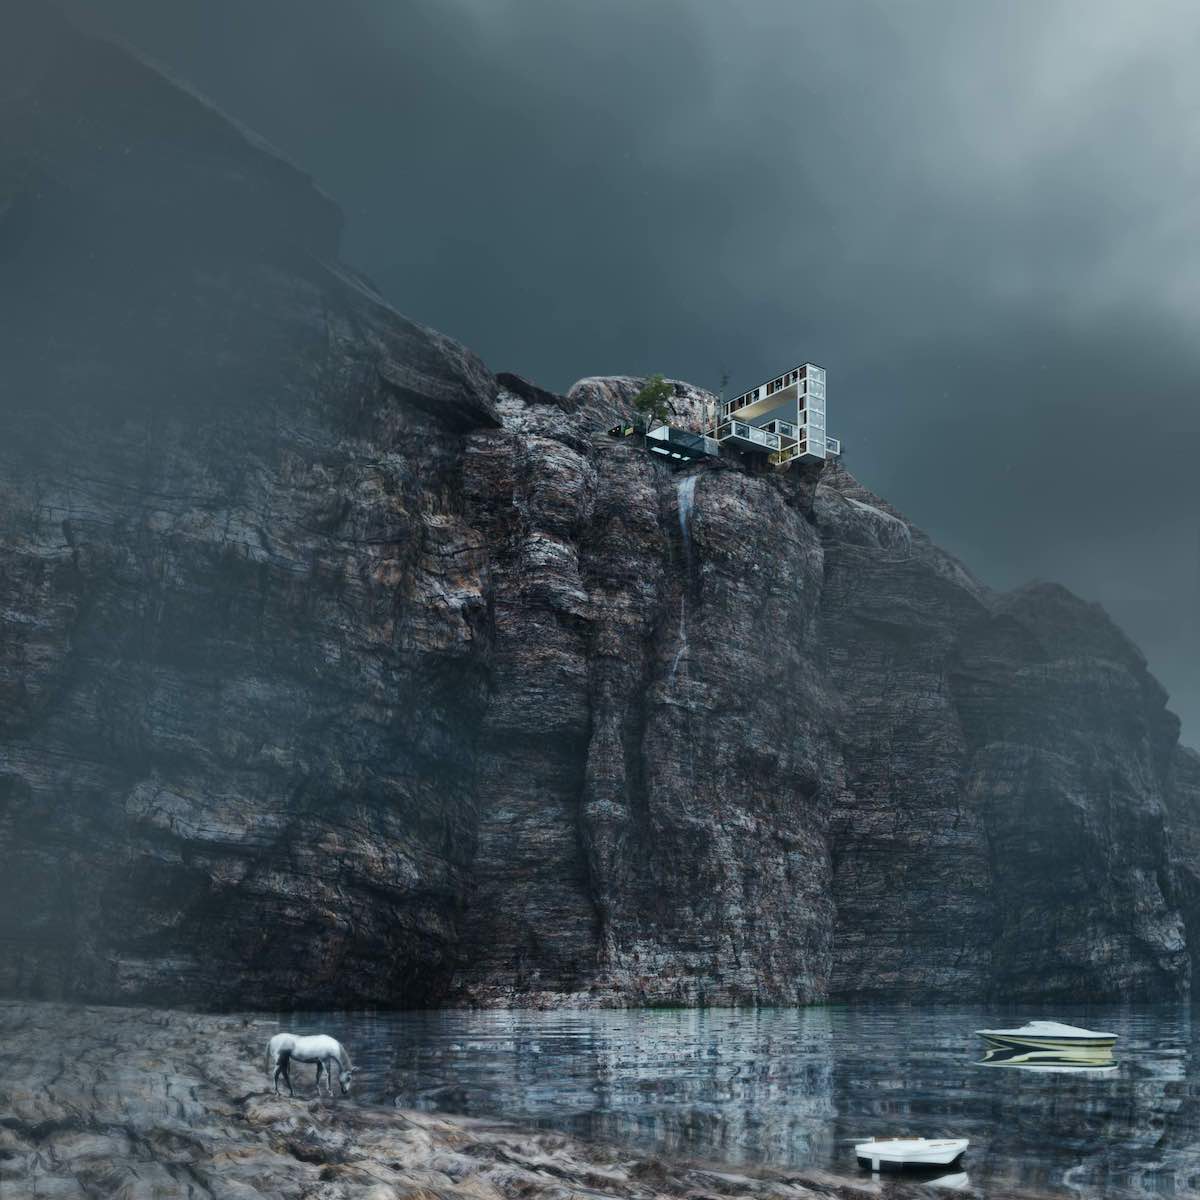 404 error page deisgn example #181: Daring Architectural Concept Perches a House on the Side of a Rocky Cliff